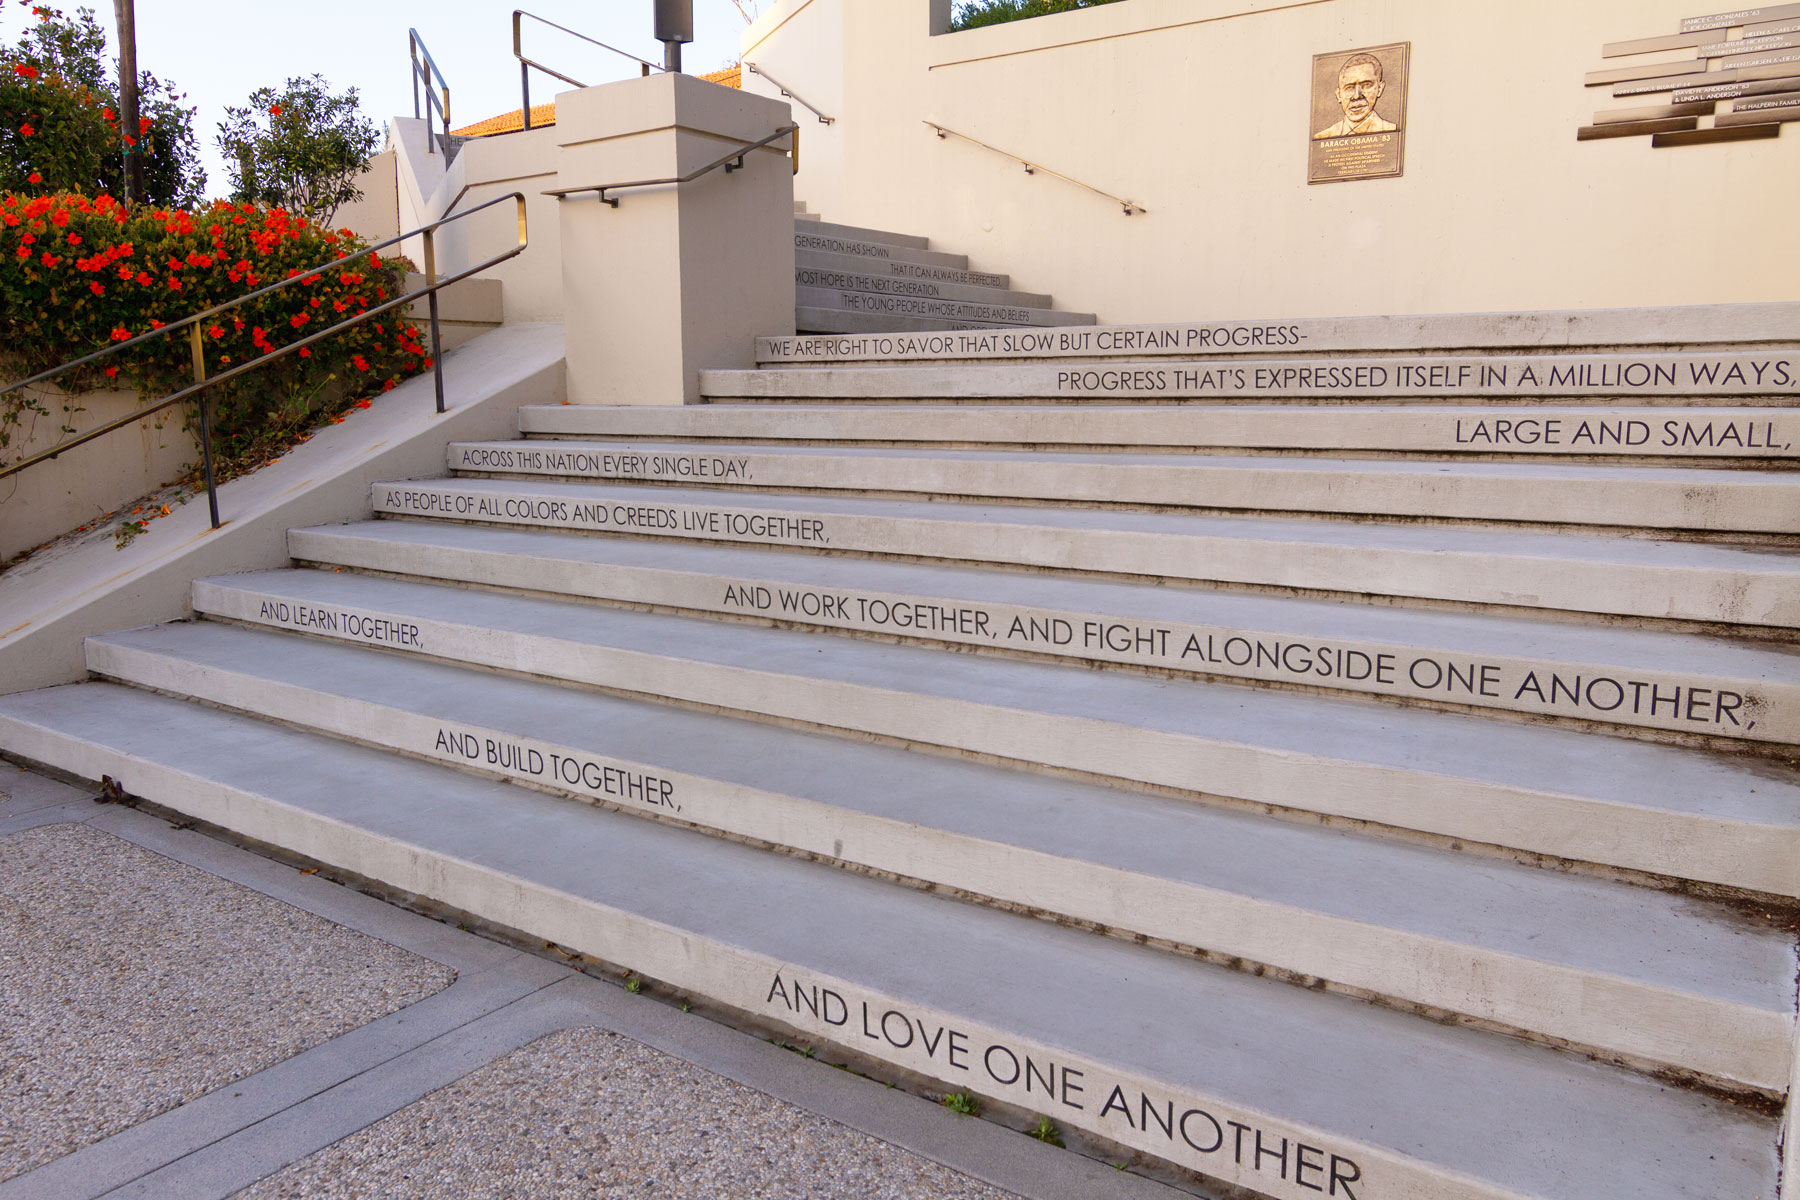 An image of the steps at Occidental College where Obama gave his first political speech as a student.